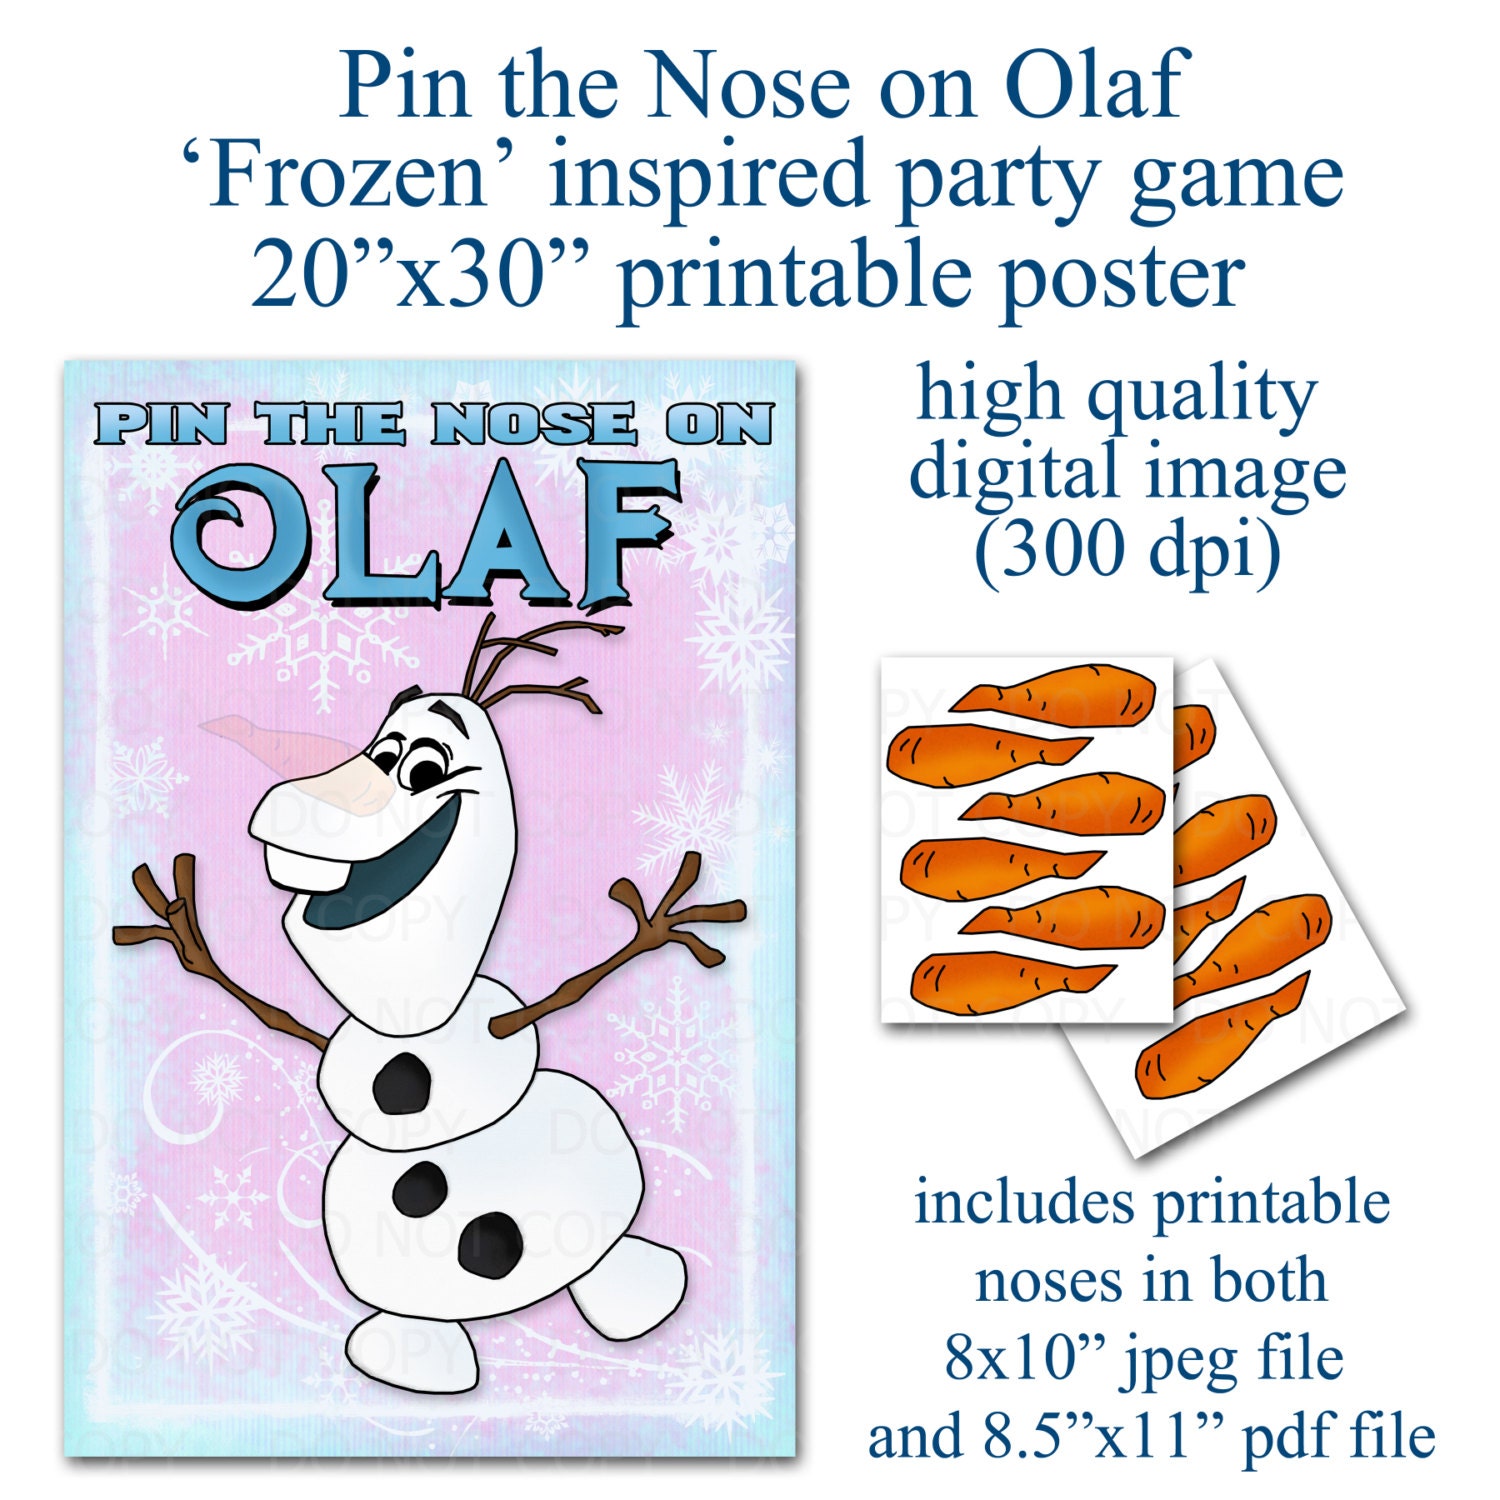 printable diy pin the nose on the snowman game party poster etsy